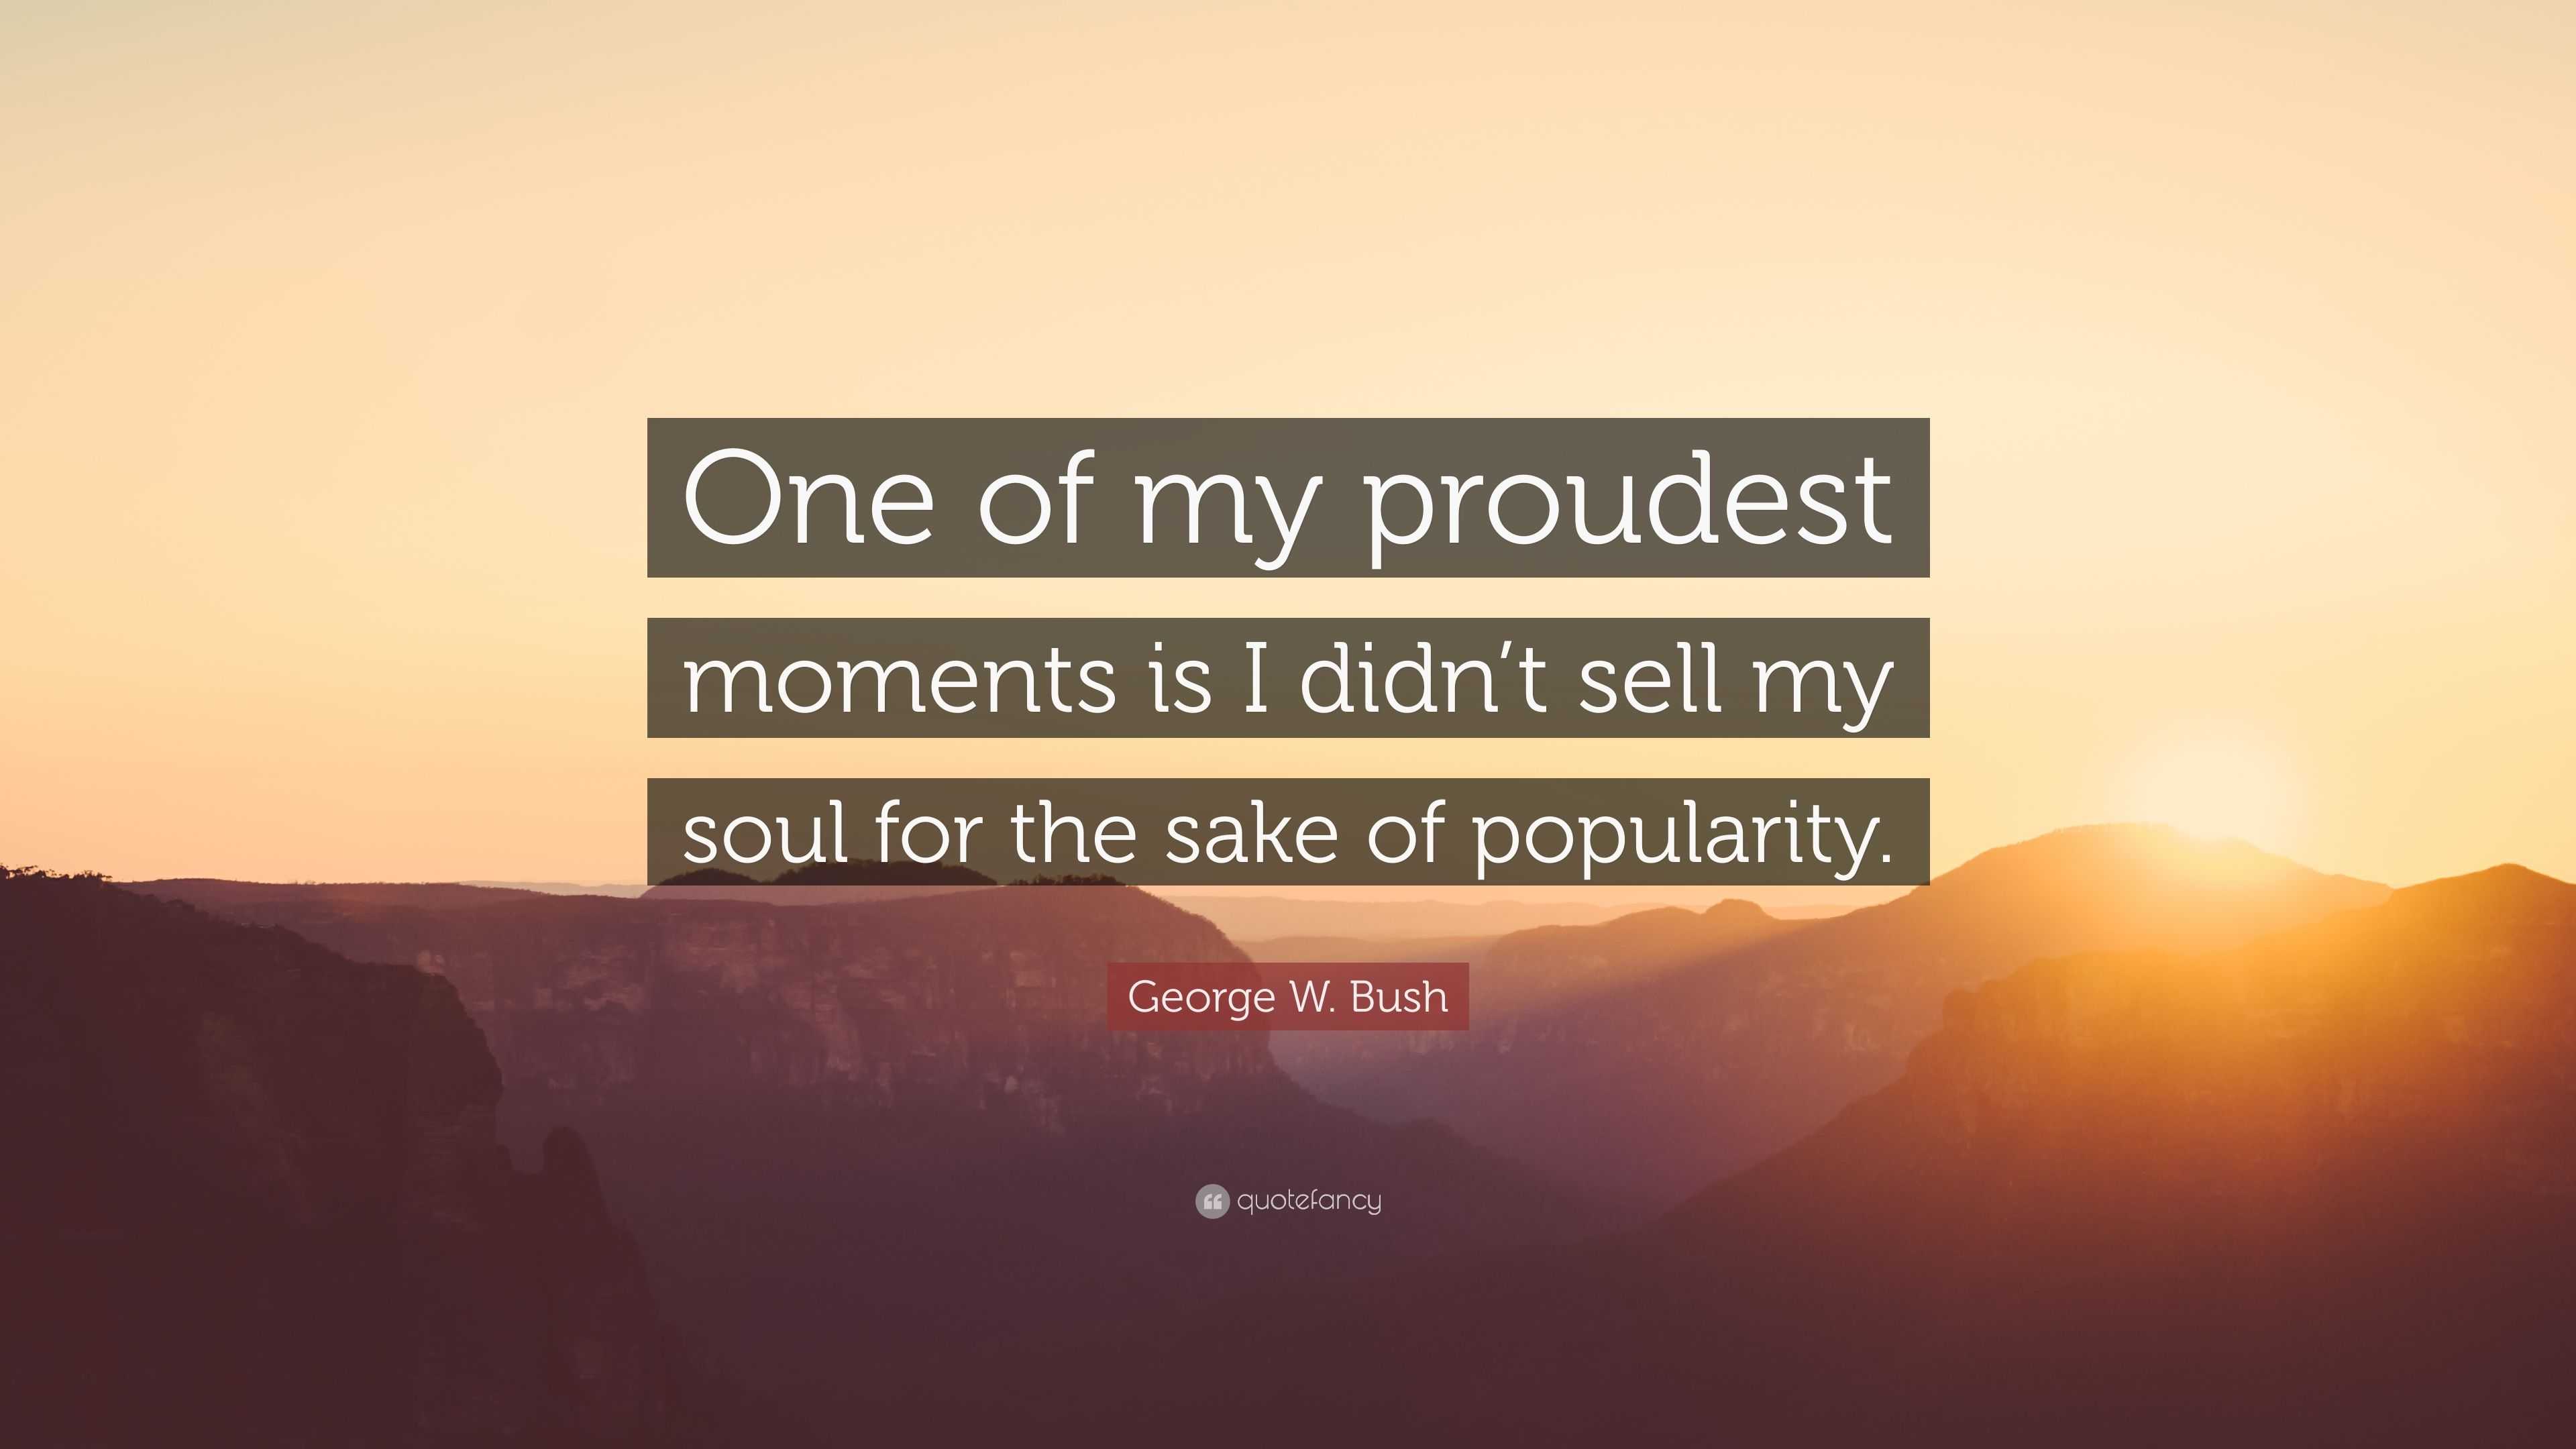 George W. Bush Quote: “One of my proudest moments is I didn’t sell my